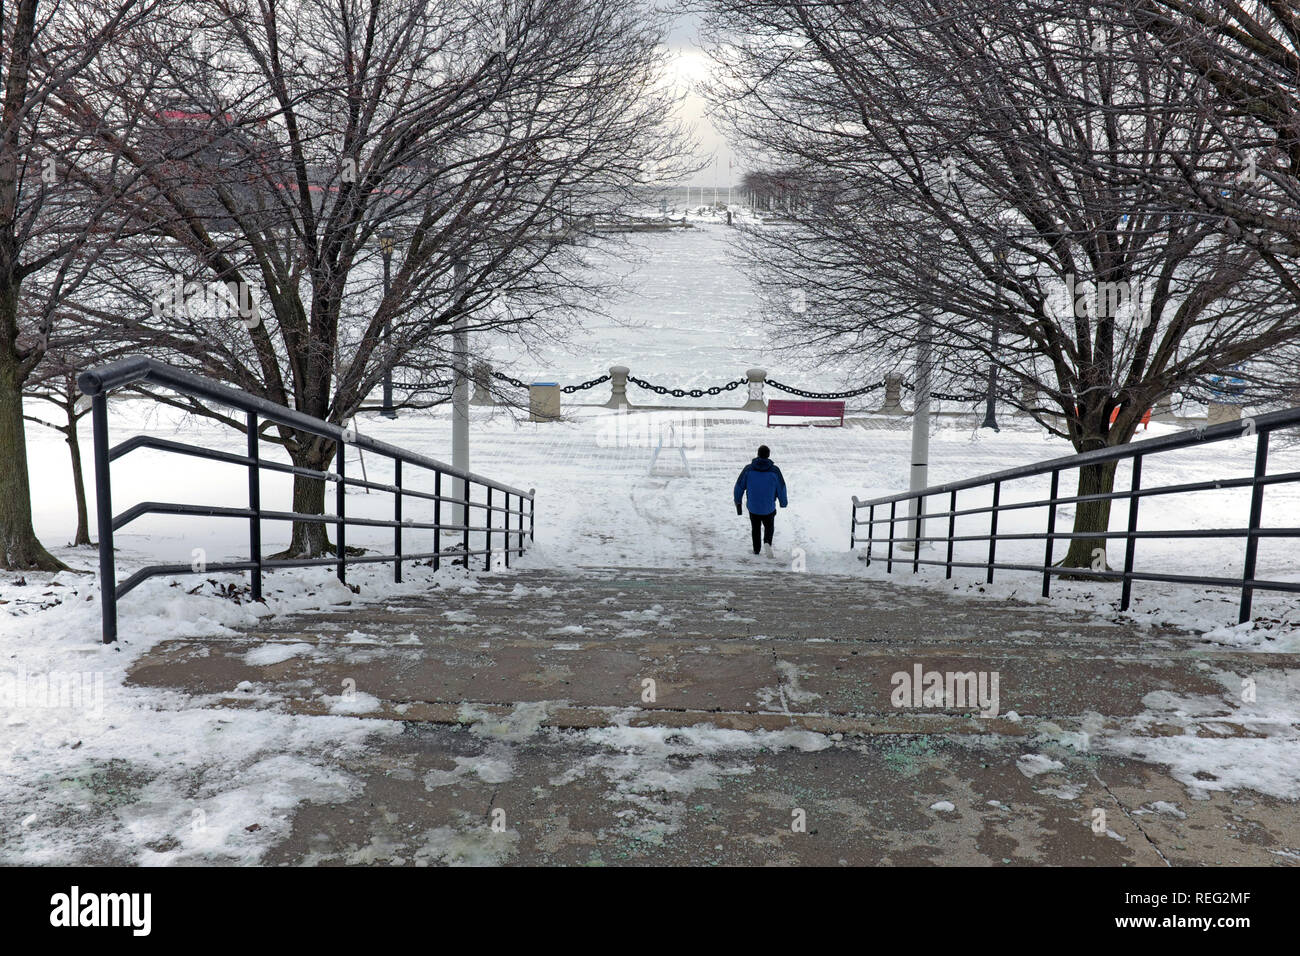 Cleveland, Ohio, USA, 21st January 2019.  A solitary man braves the extreme cold weather that has followed winter storm Harper.  The Northcoast Harbor off the shores of Lake Erie is frozen over, the first time this winter season.  Credit: Mark Kanning/Alamy Live News. Stock Photo